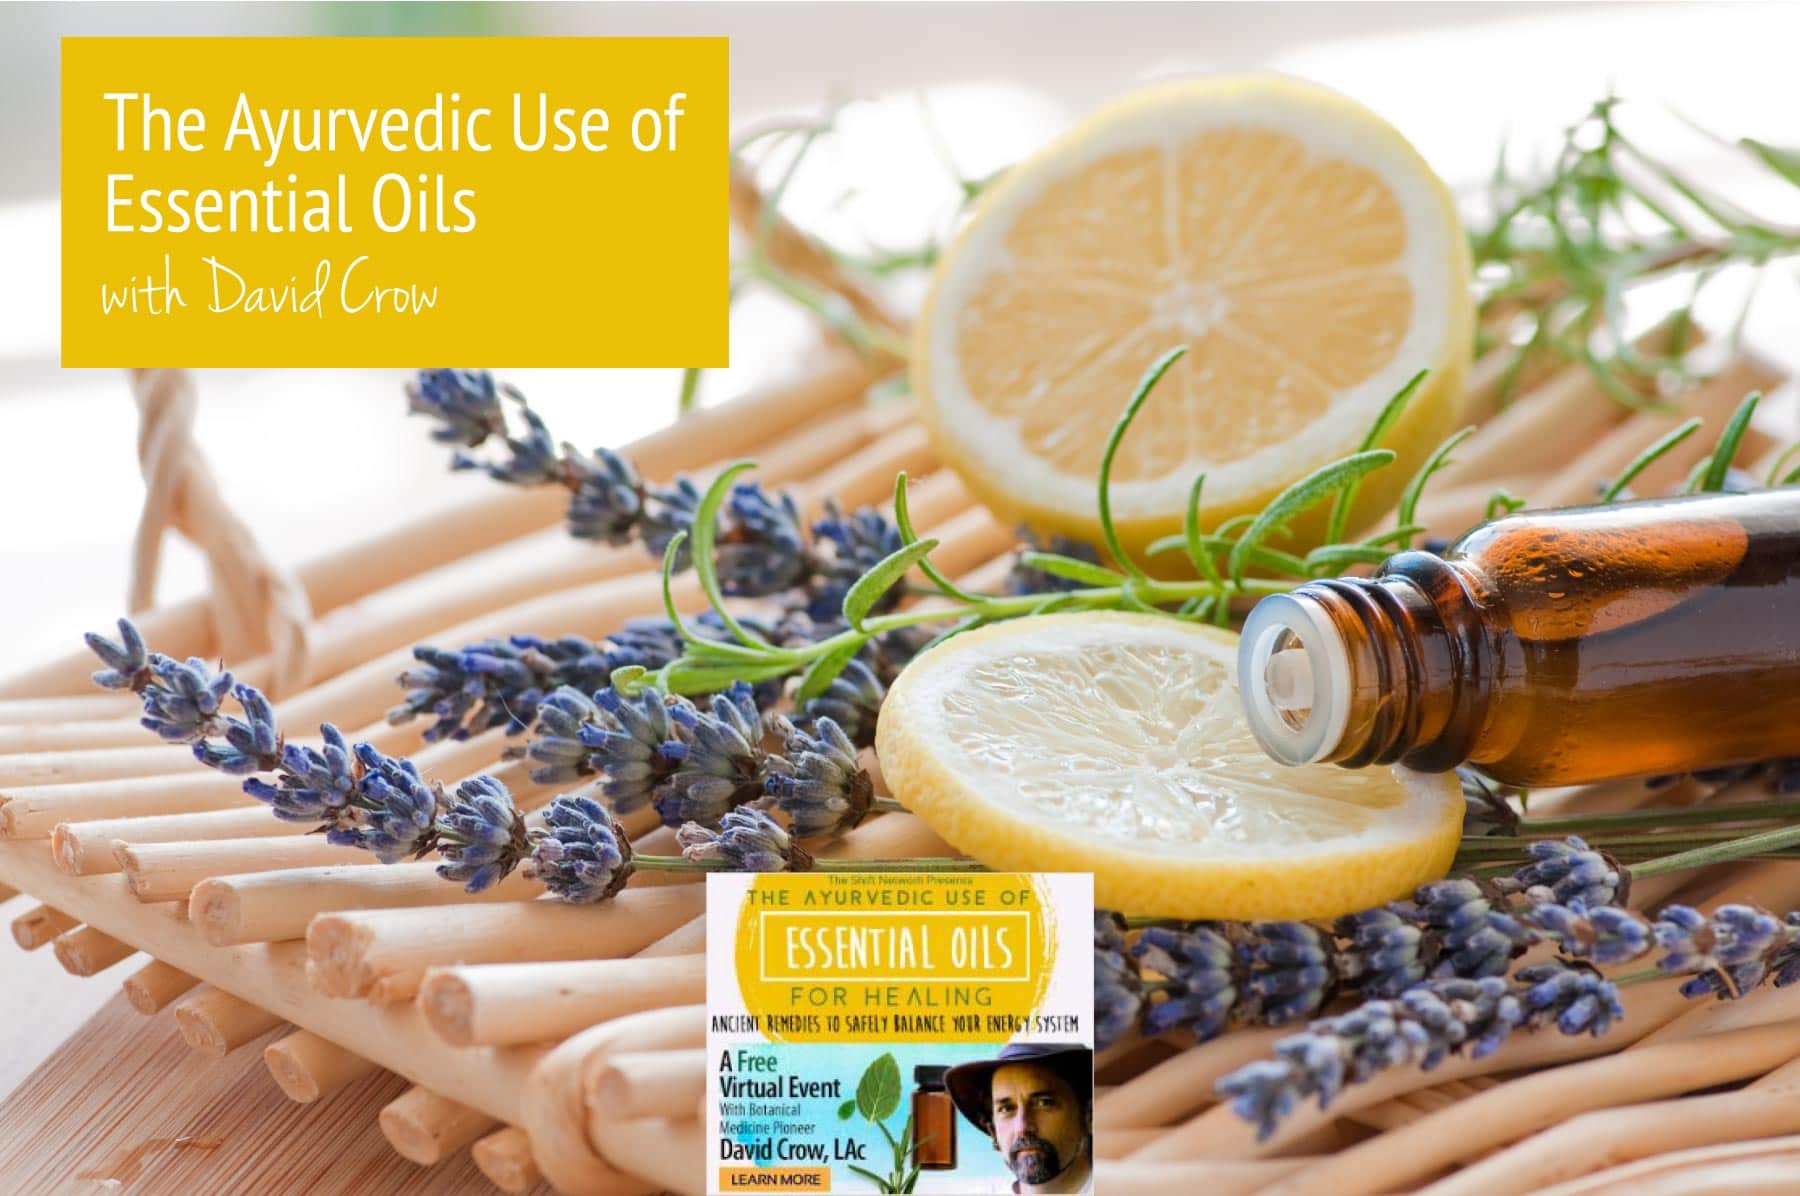 The Ayurvedic Use of Essential Oils for Healing with David Crow